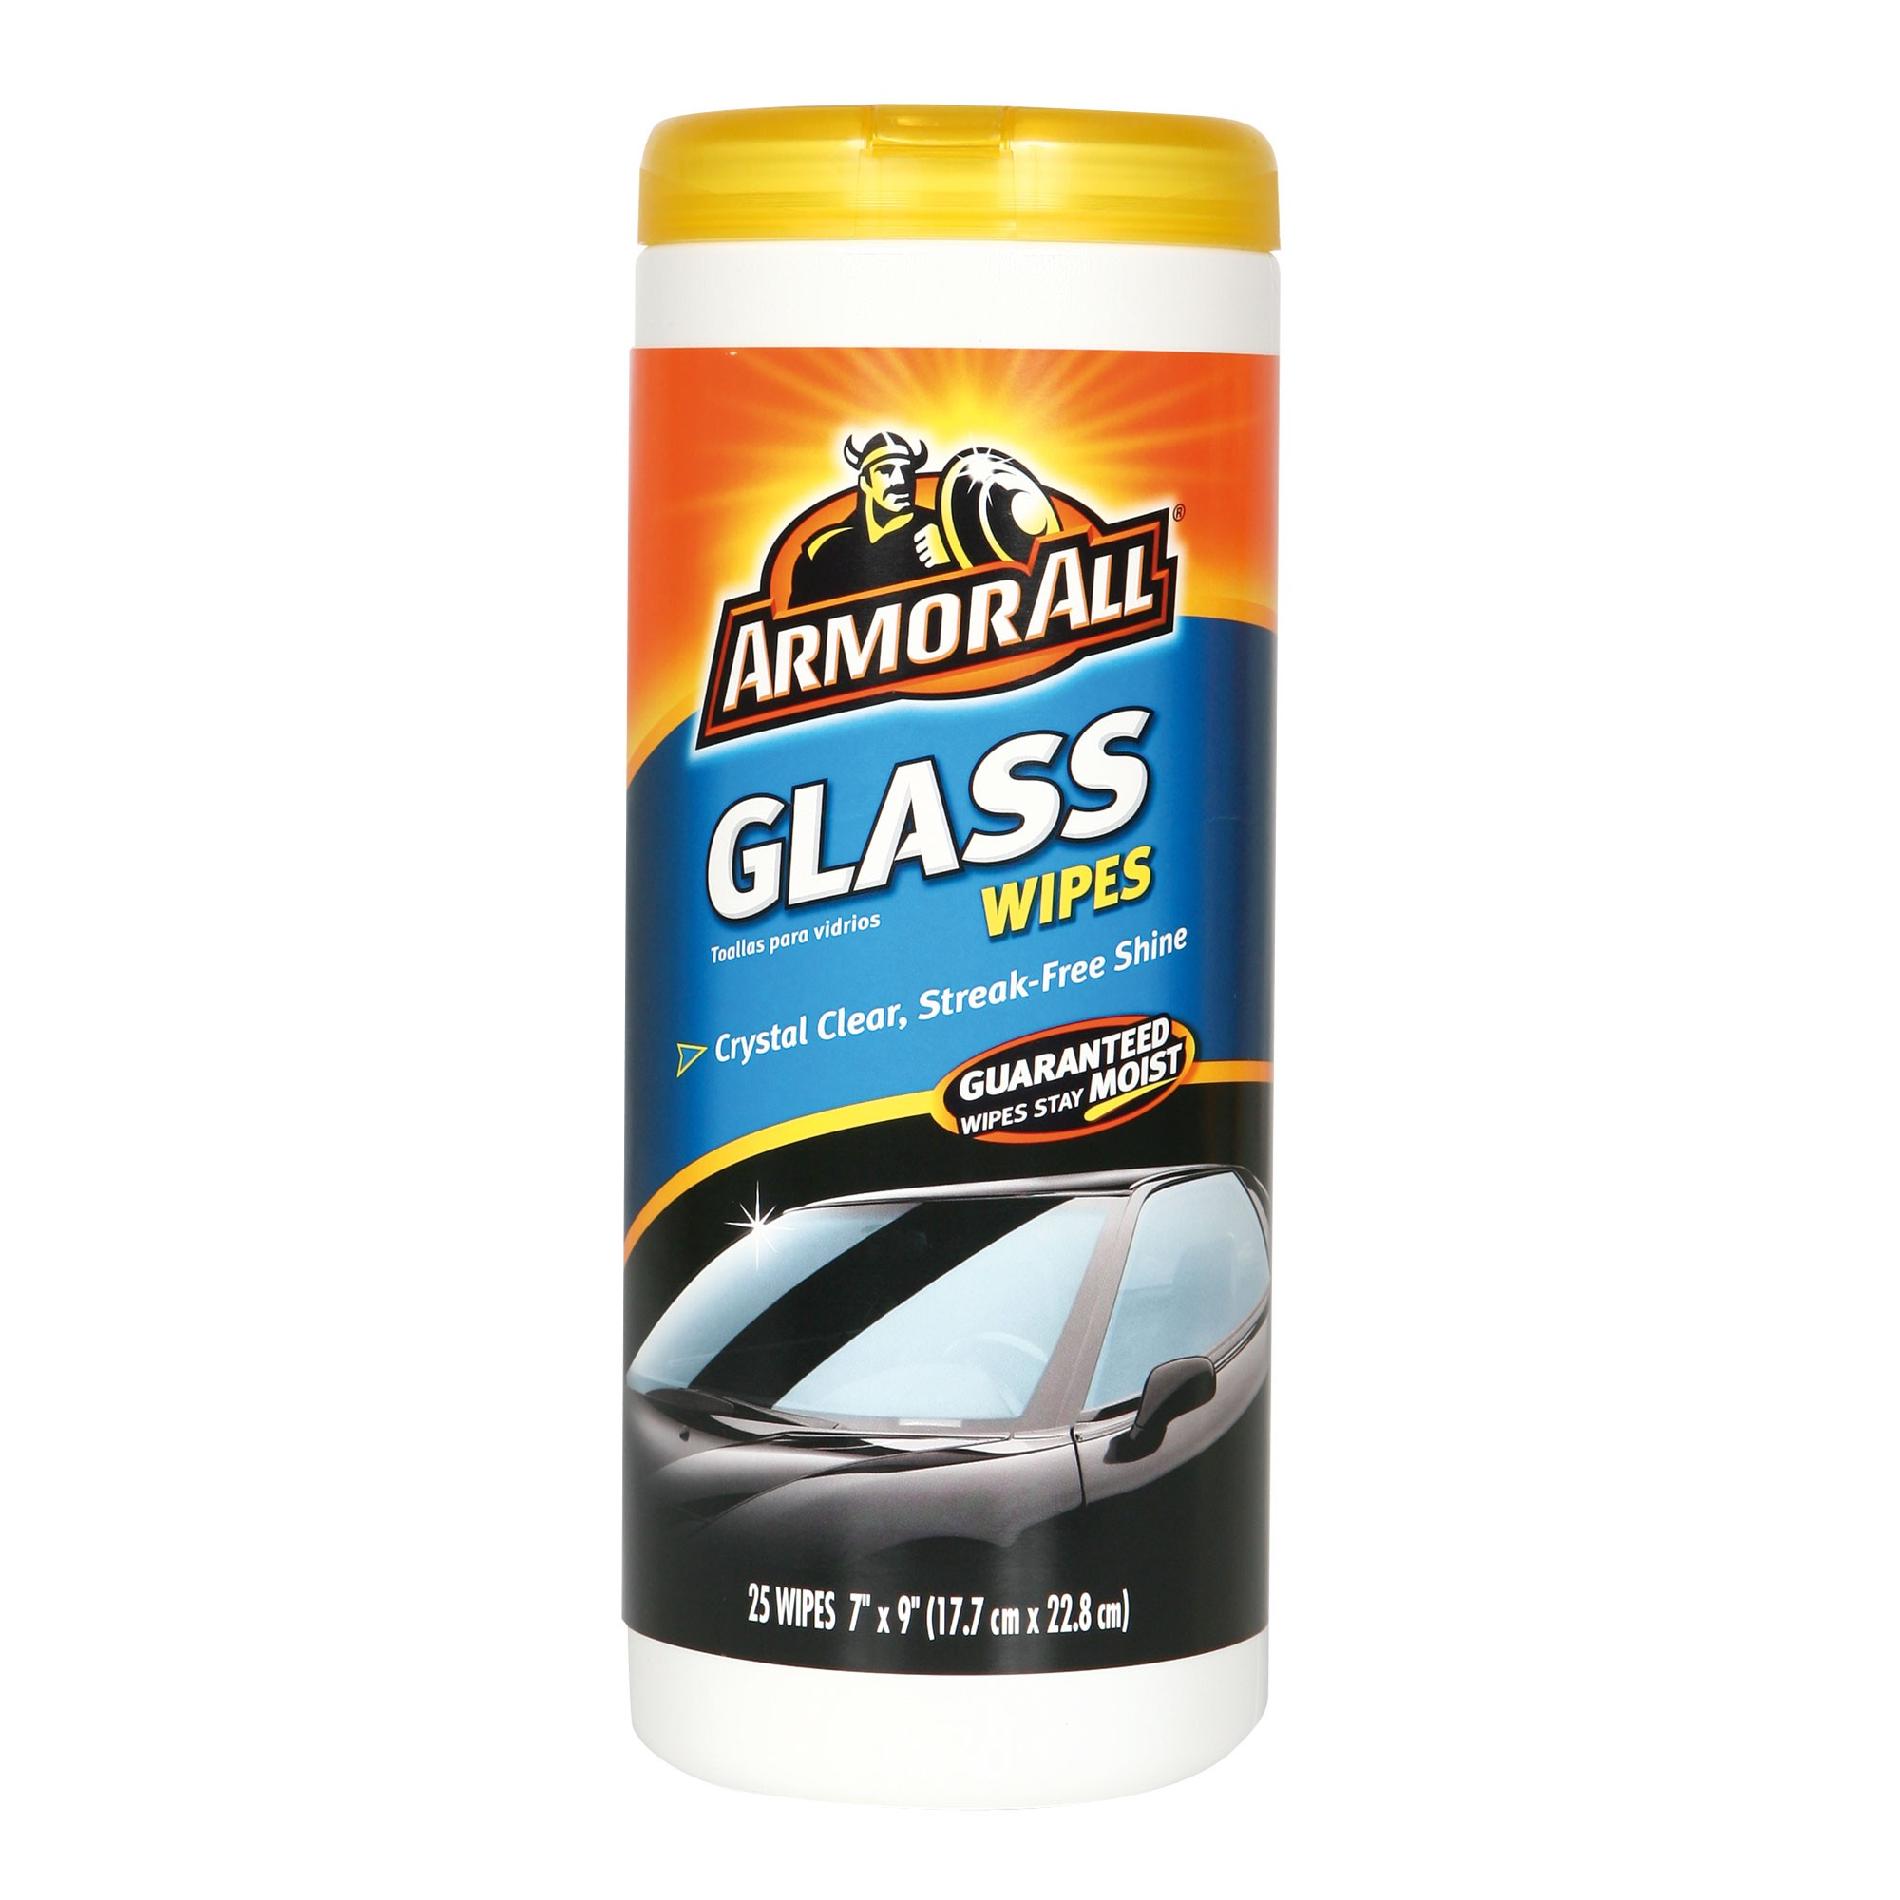 Armor All Glass Wipes, 25 wipes